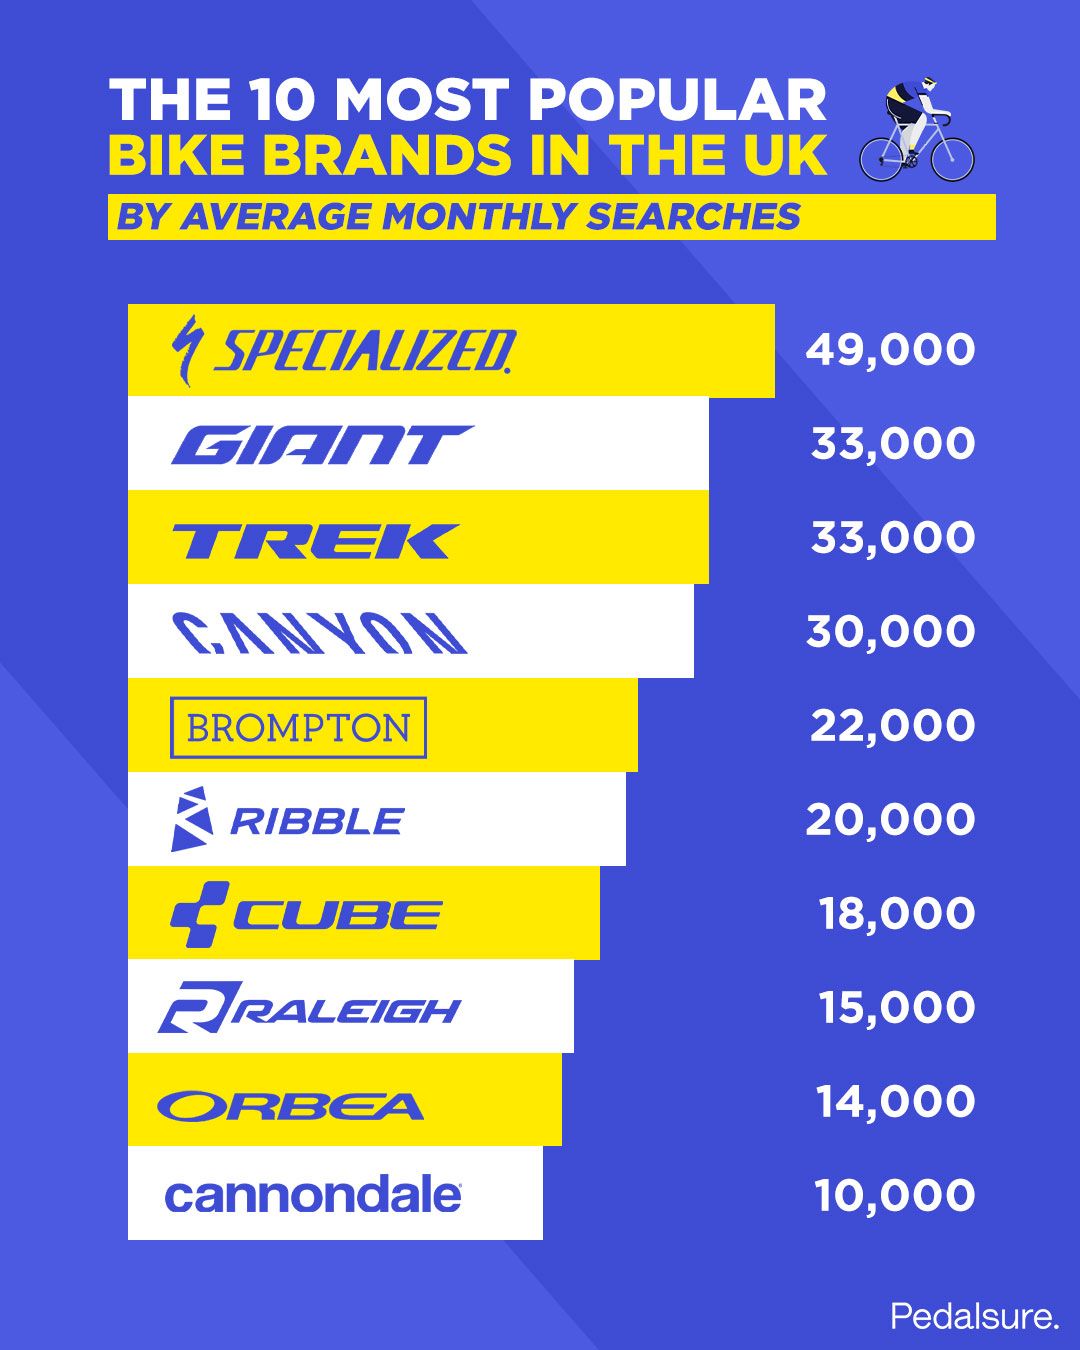 The 10 Most Popular Bike Brands In The UK